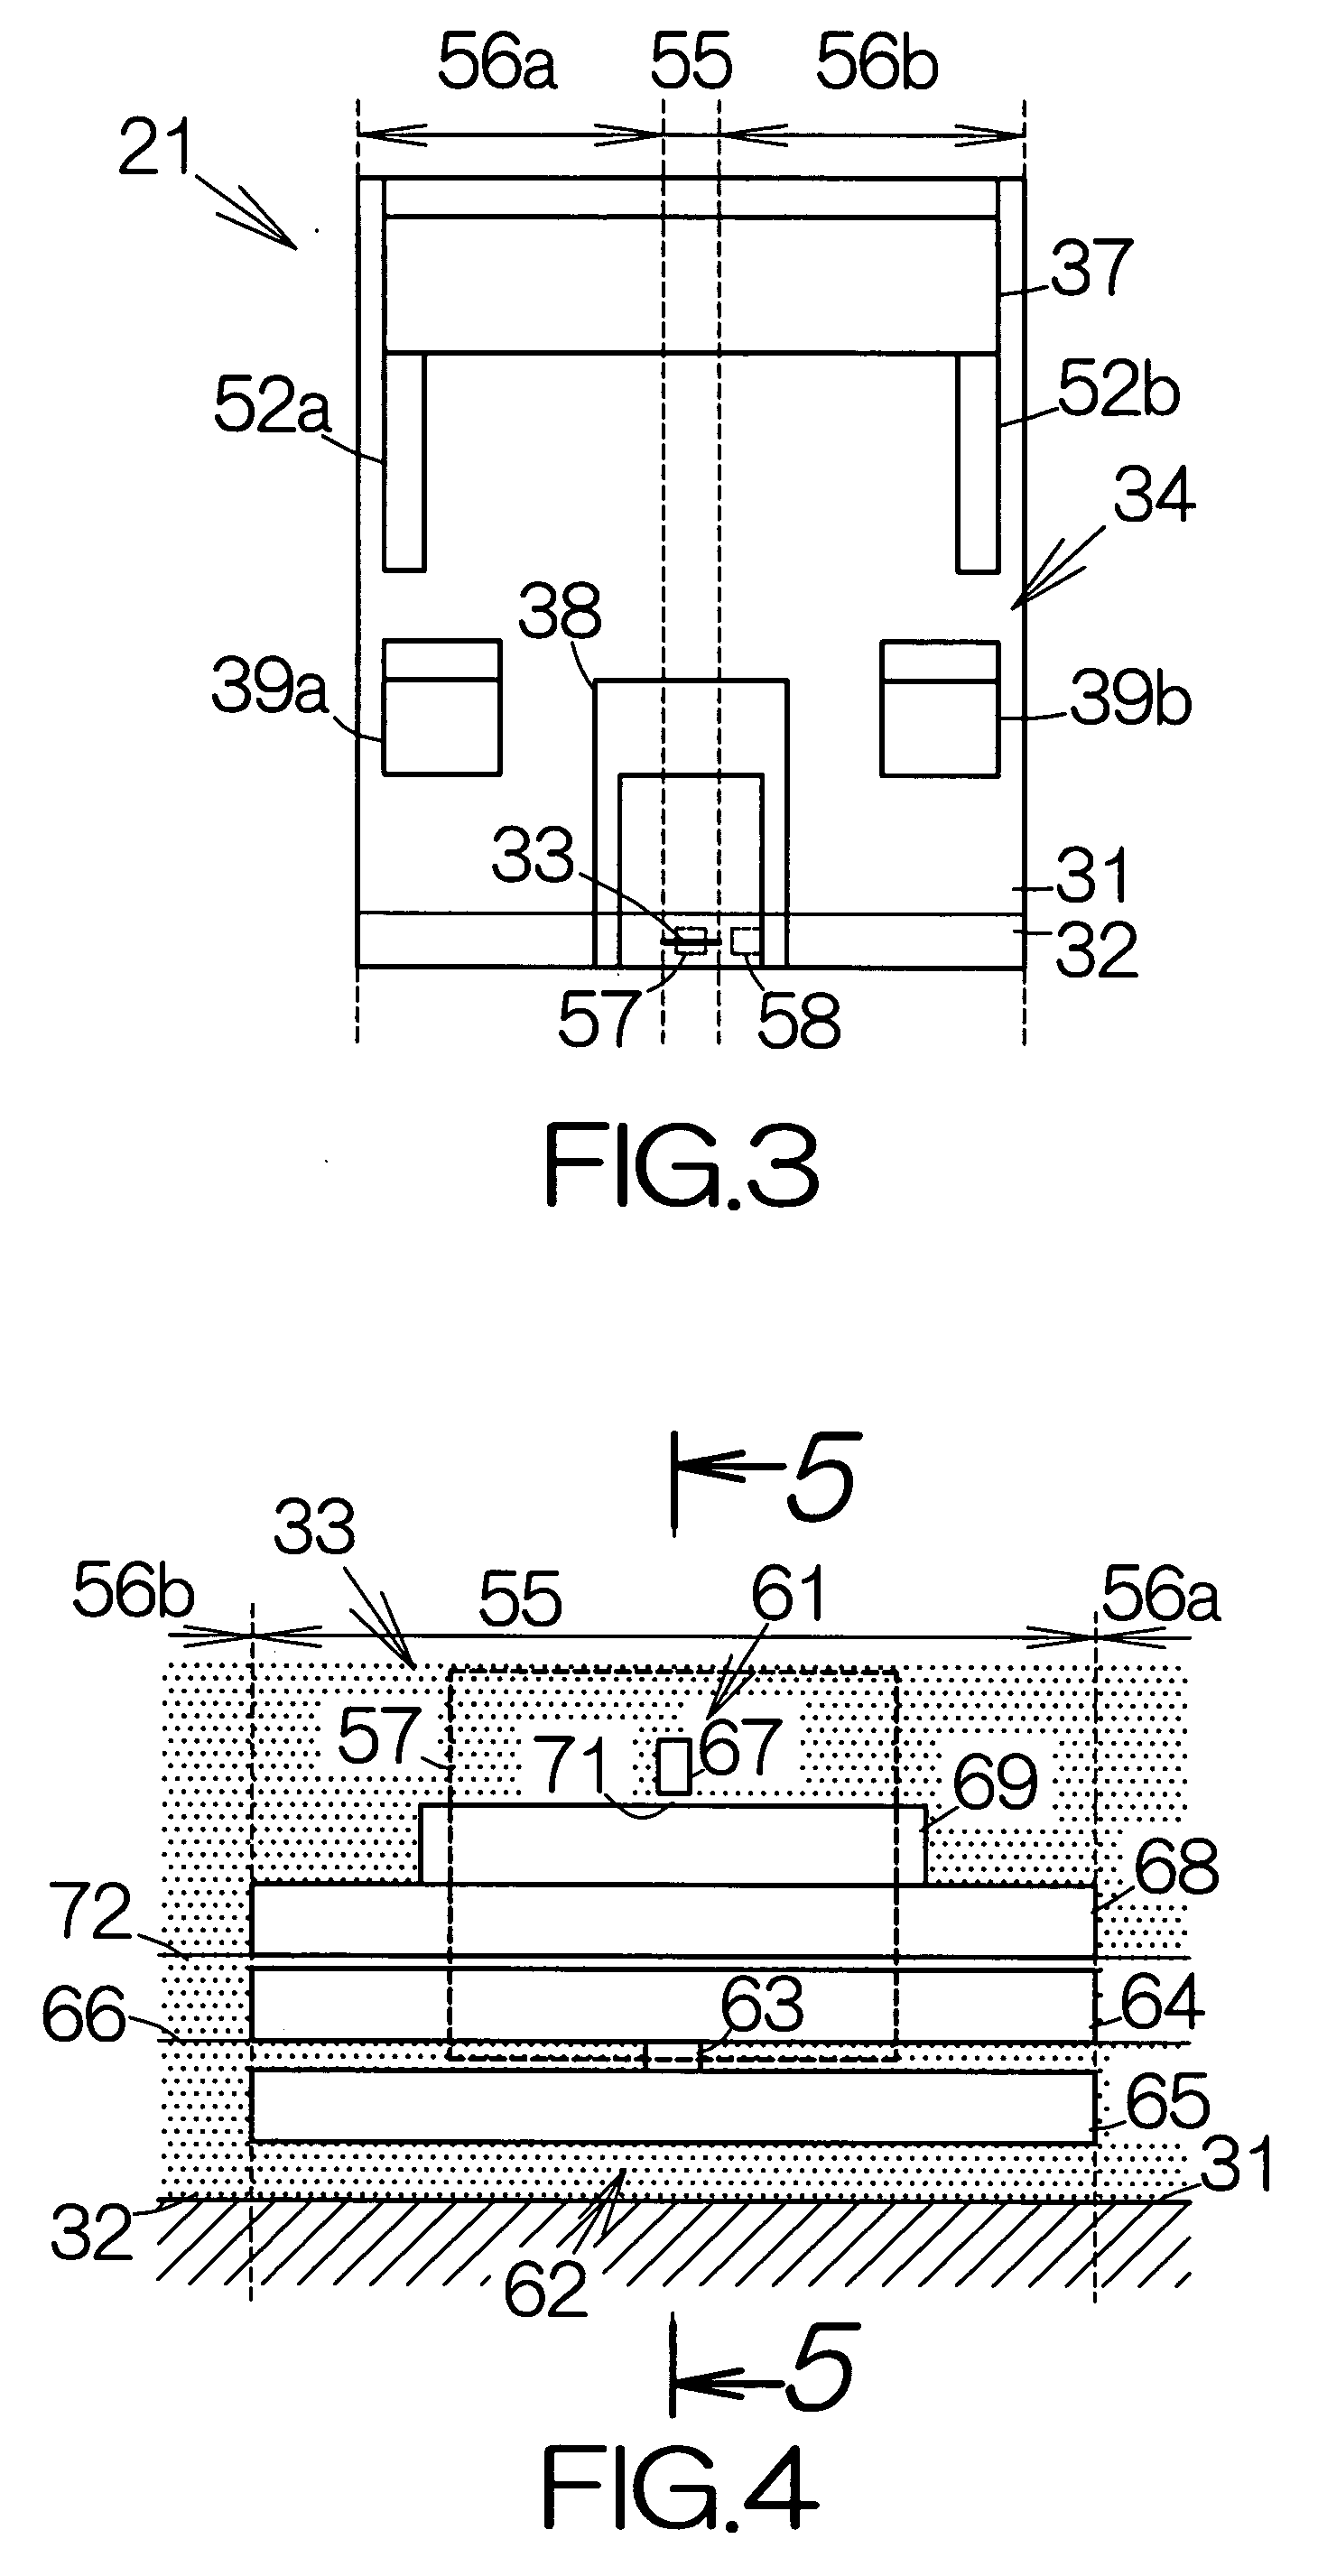 Head slider having protruding head element and apparatus for determining protrusion amount of head element